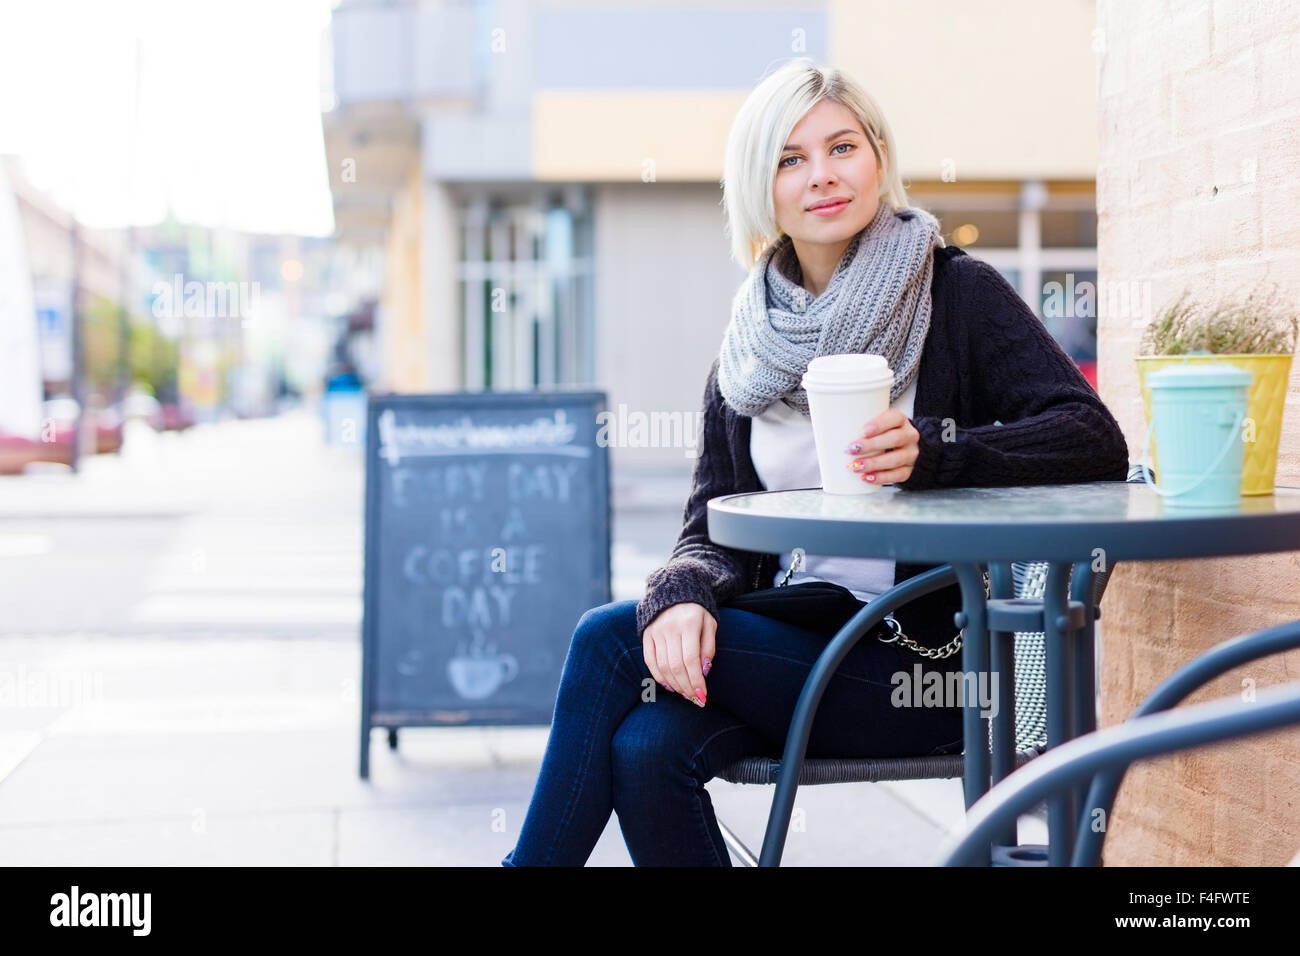 Smiling blonde woman drinking coffee at outdoor cafe Banque D'Images